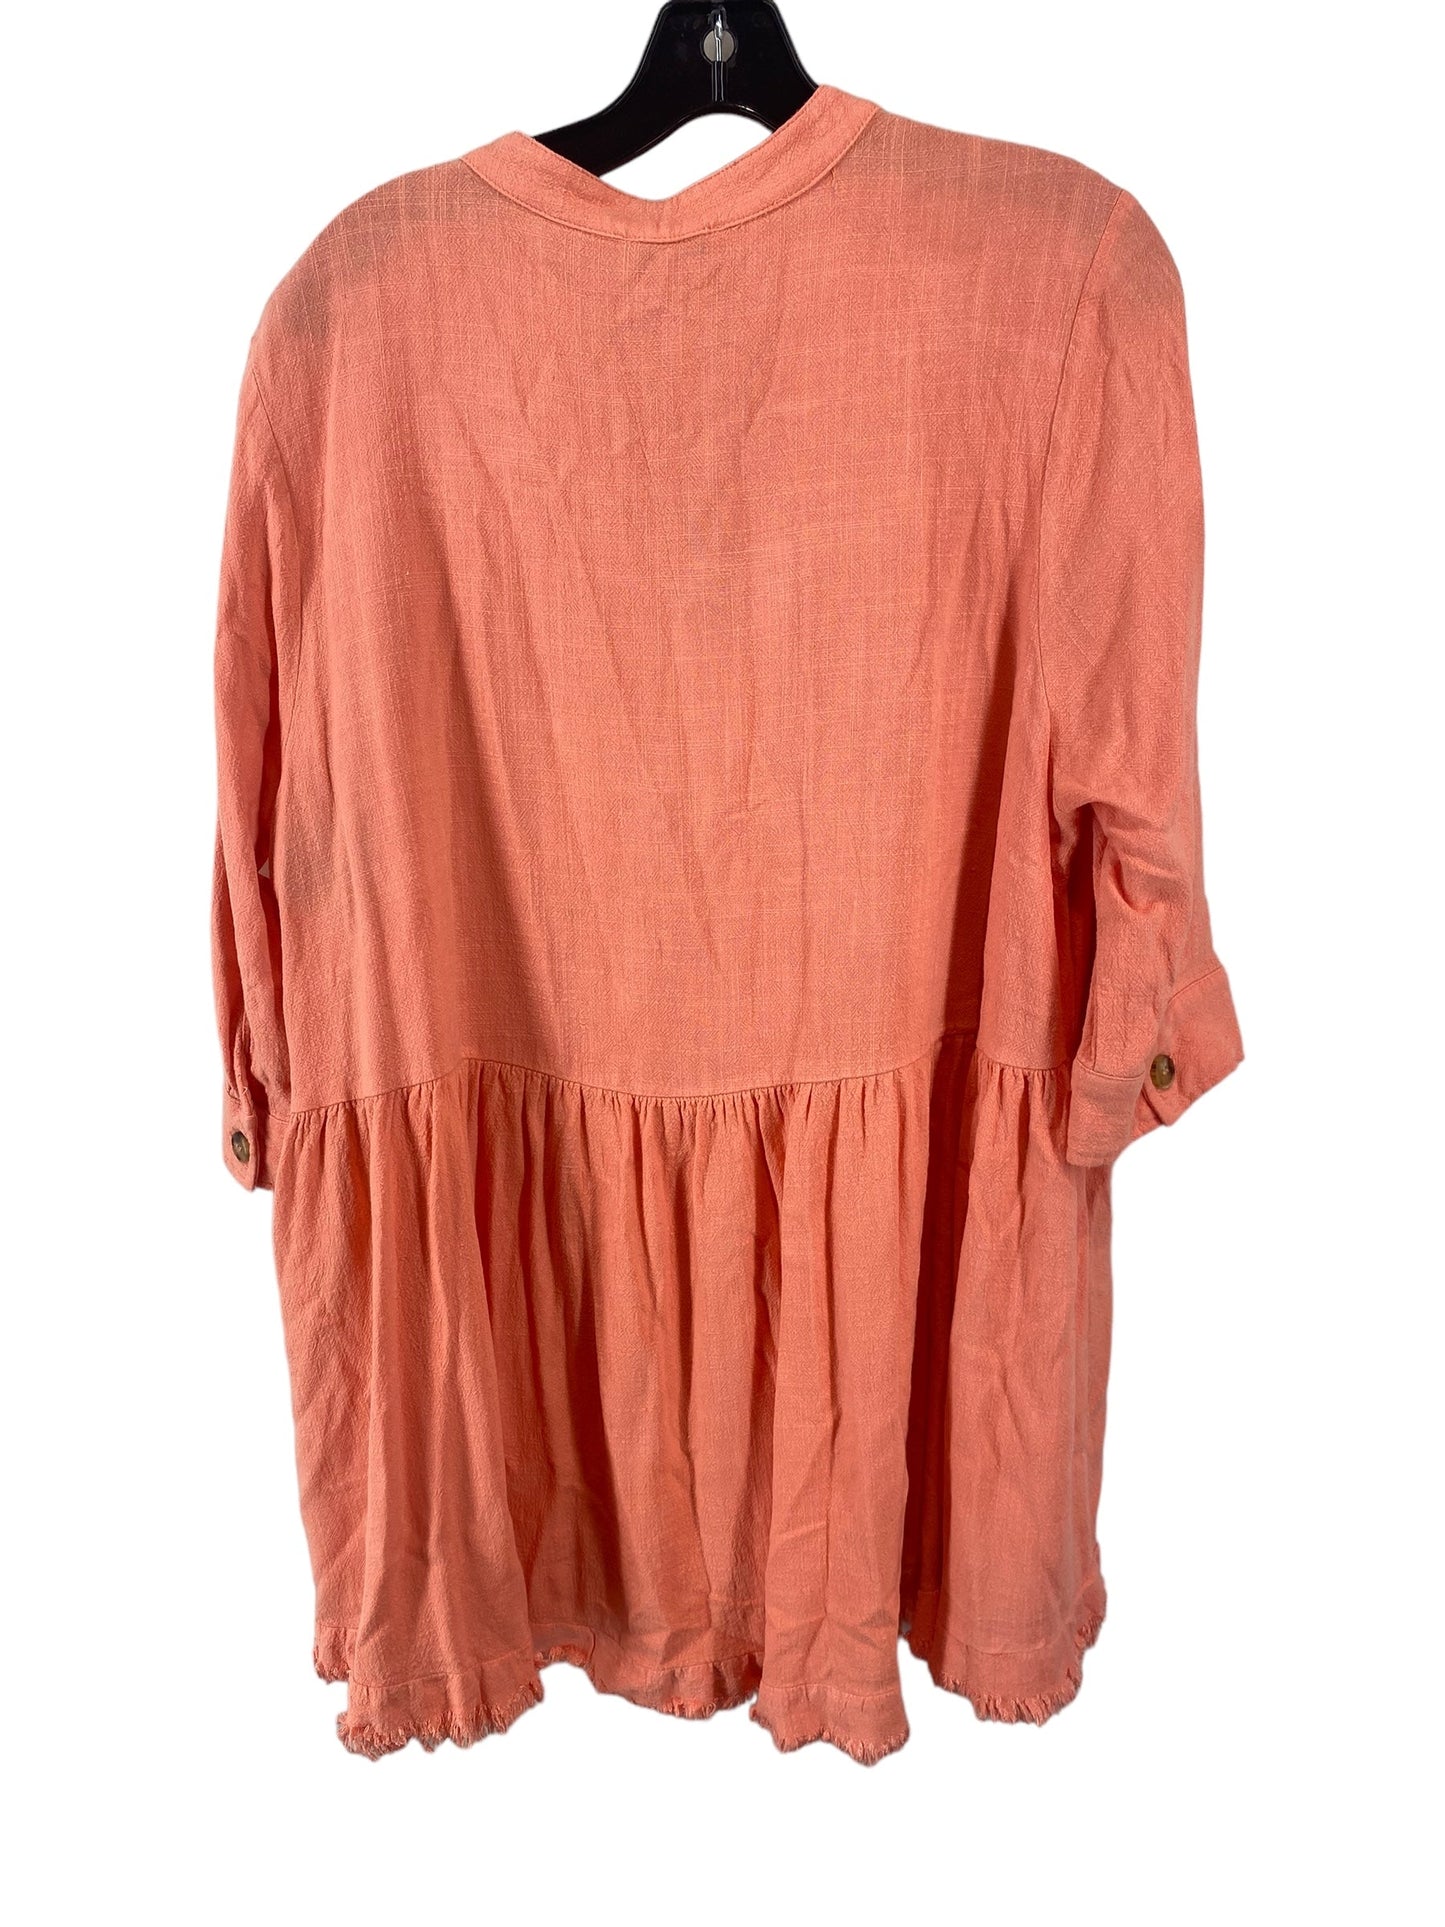 Coral Top Long Sleeve White Birch, Size M